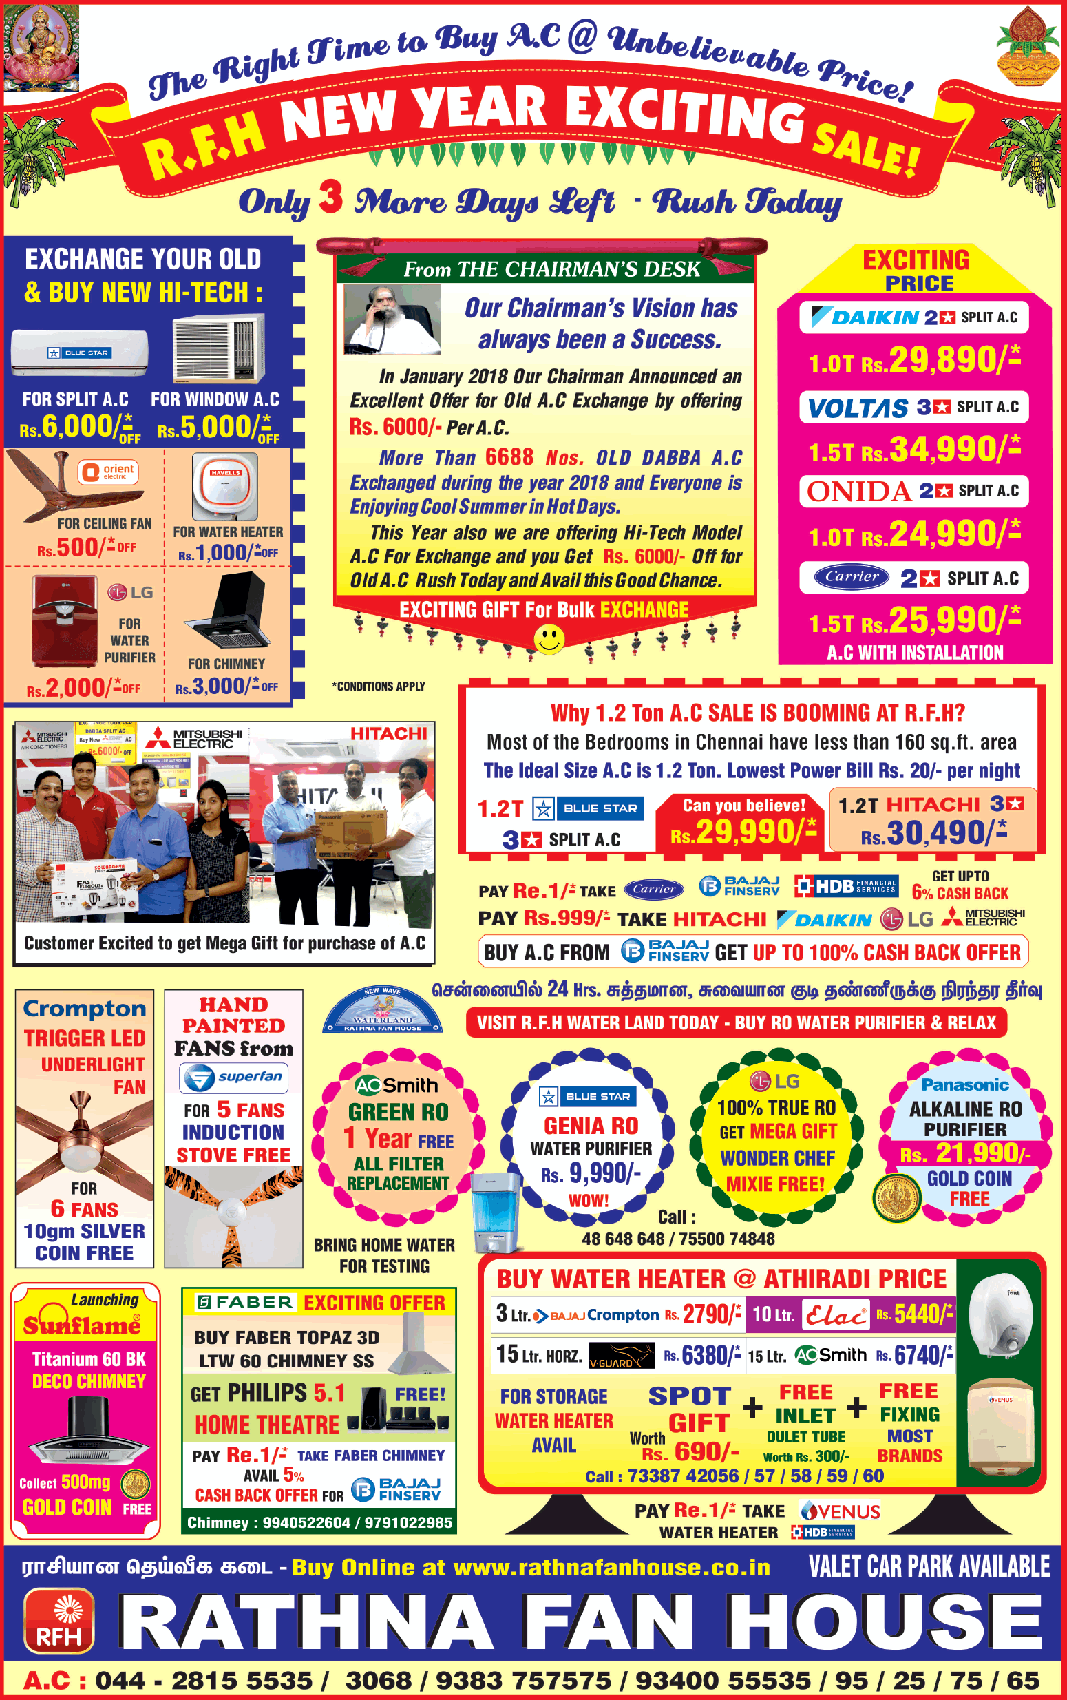 brysomme Statistisk minus Rathna Fan House New Year Exciting Sale Ad - Advert Gallery